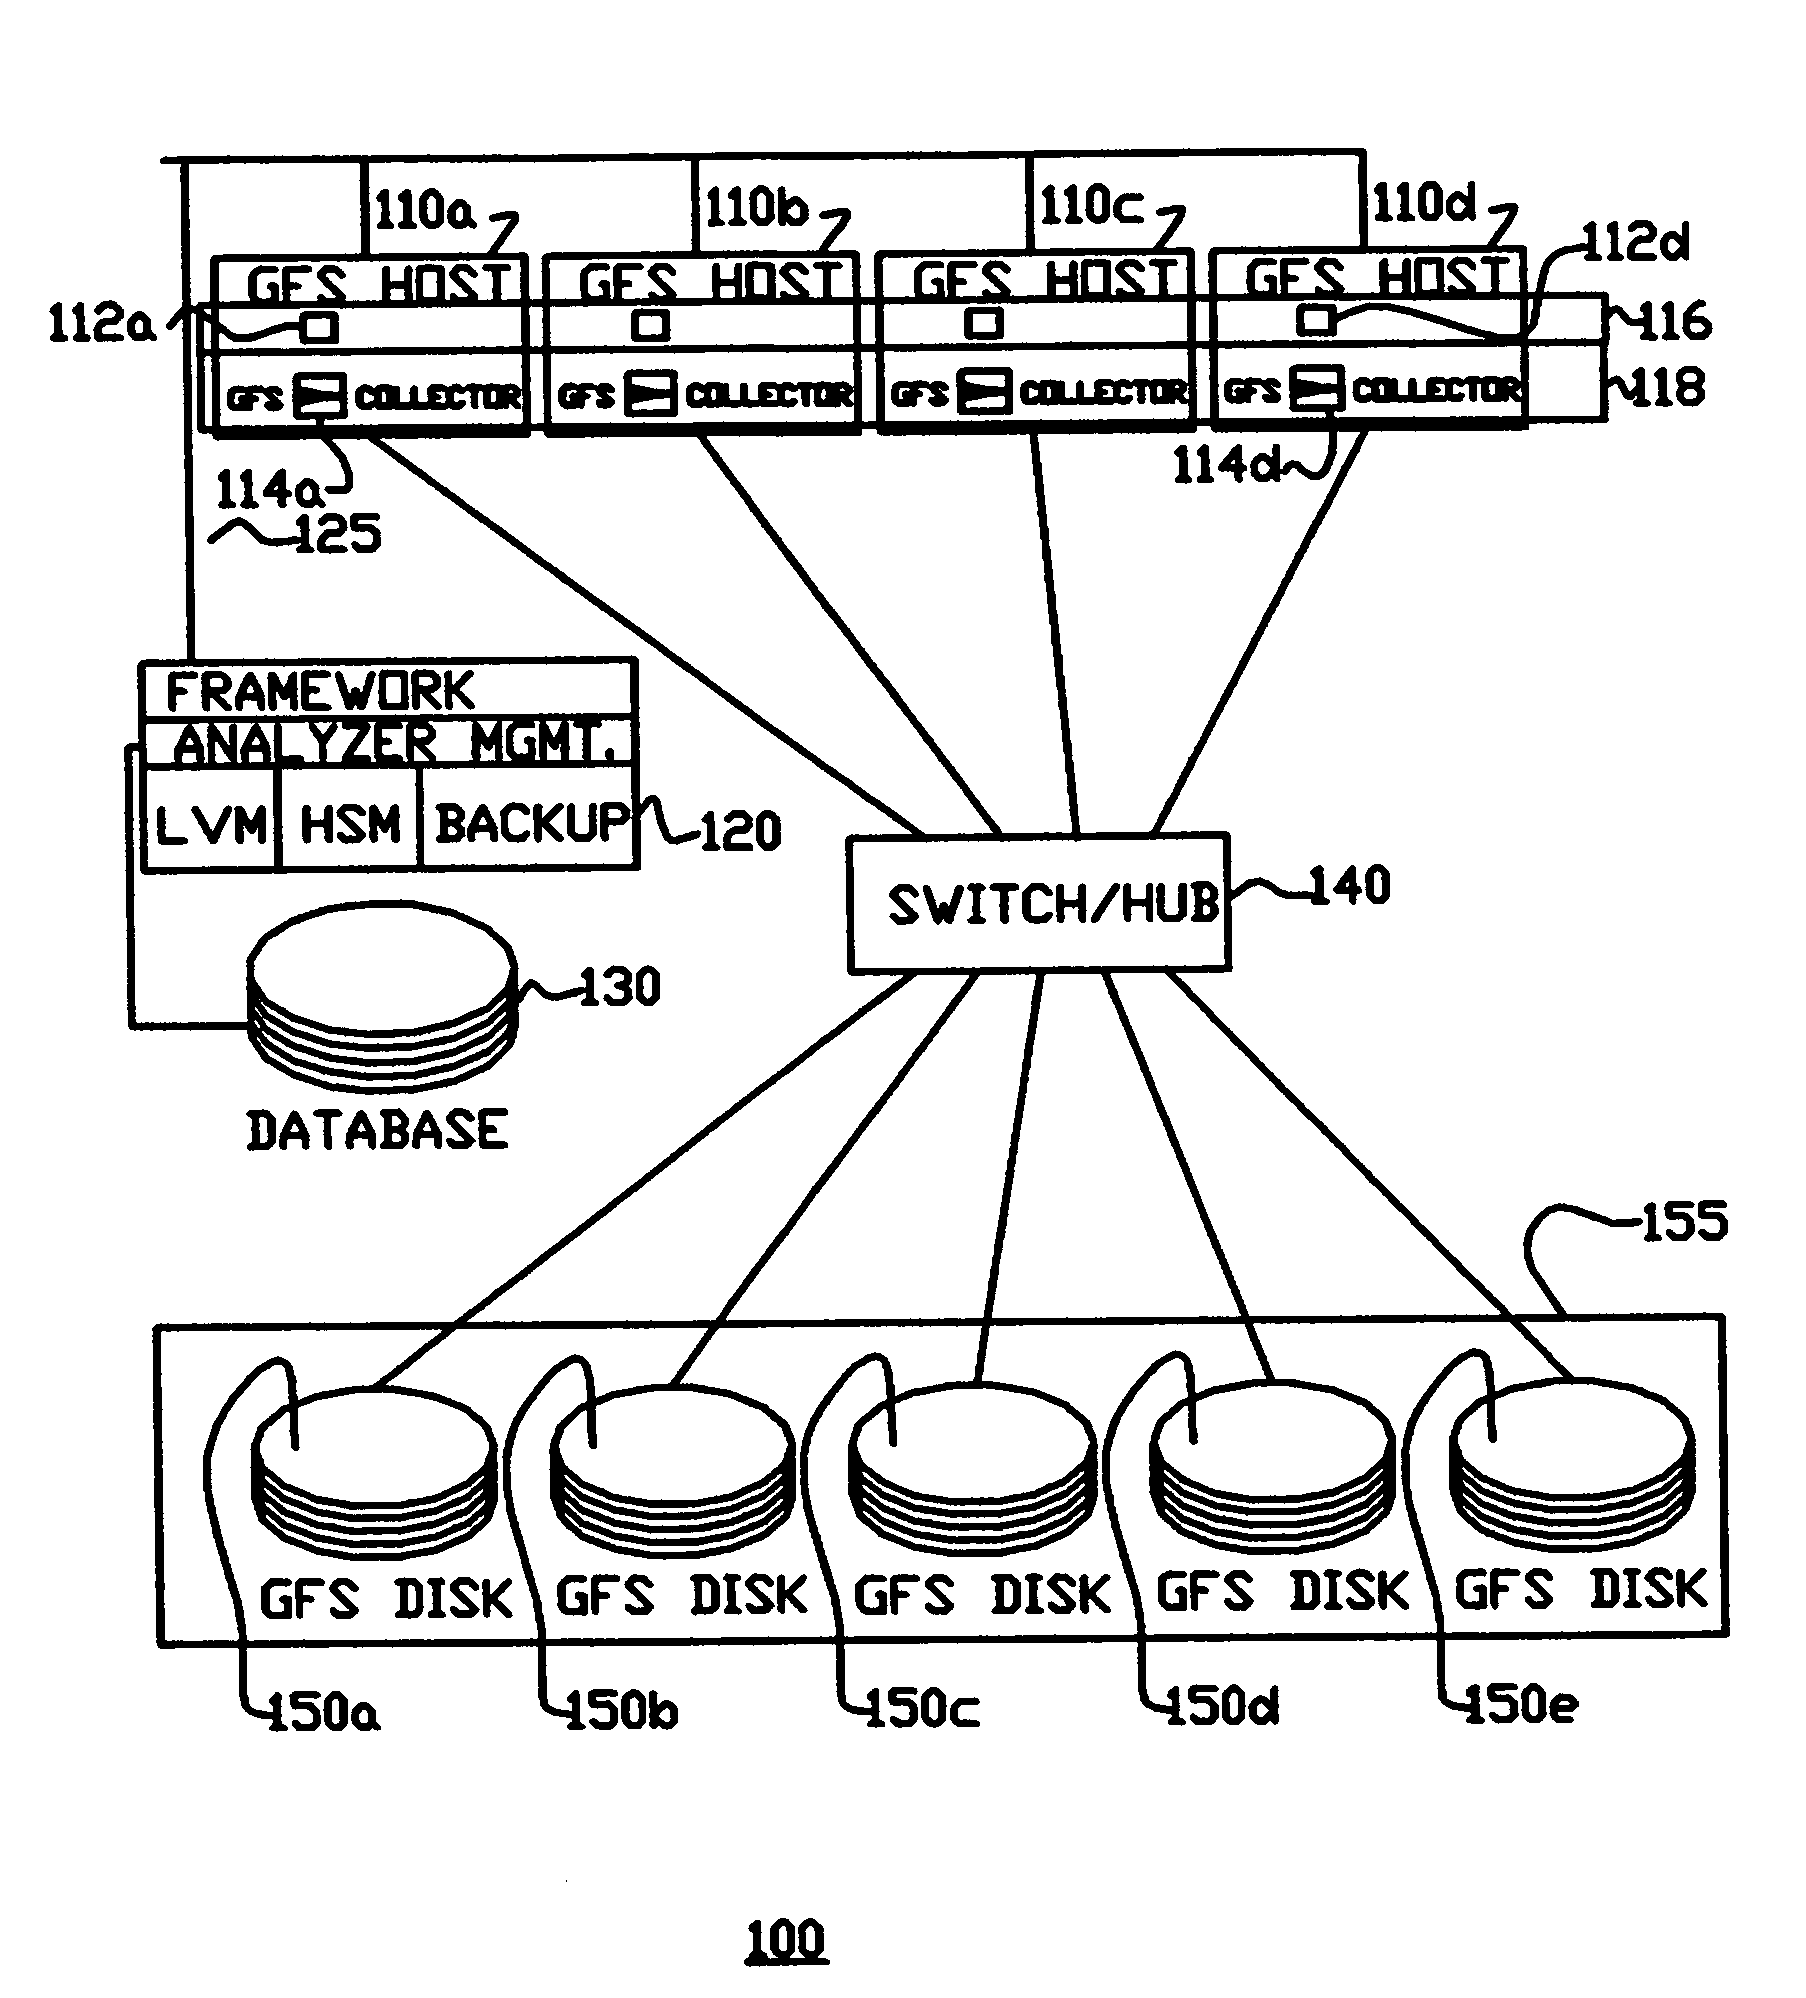 Distributed file system using disk servers, lock servers and file servers